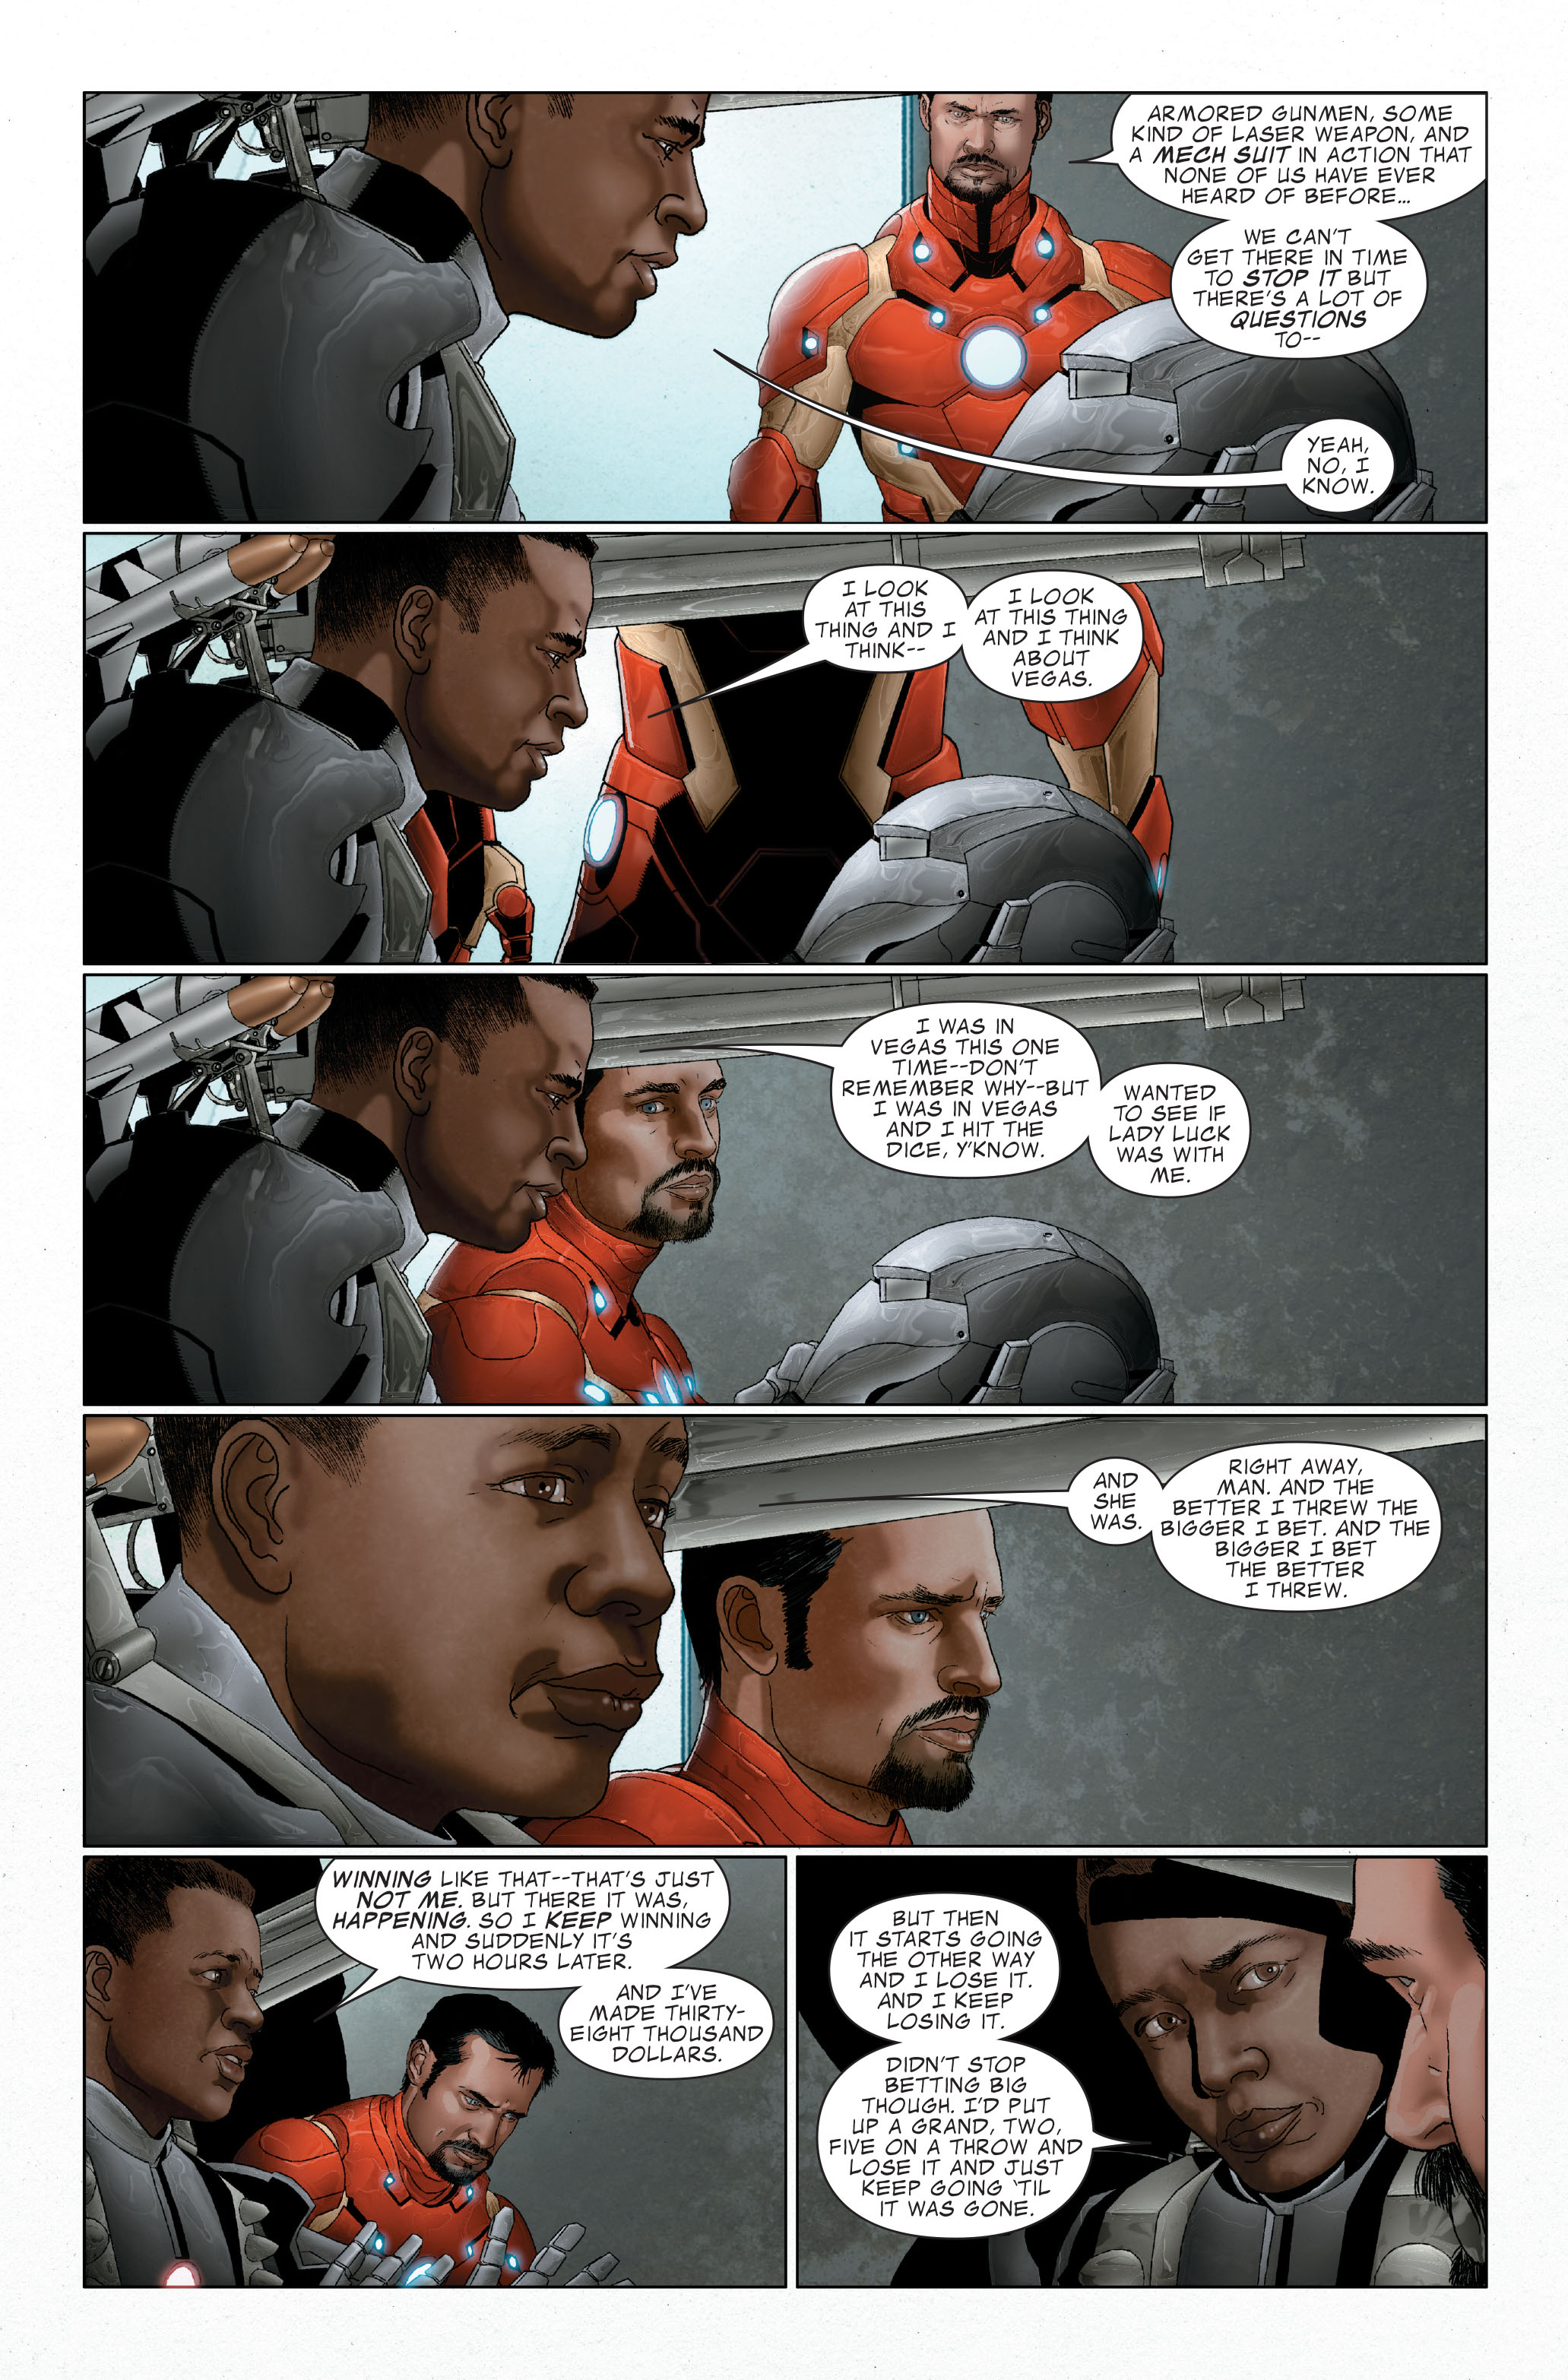 Invincible Iron Man (2008) 27 Page 18